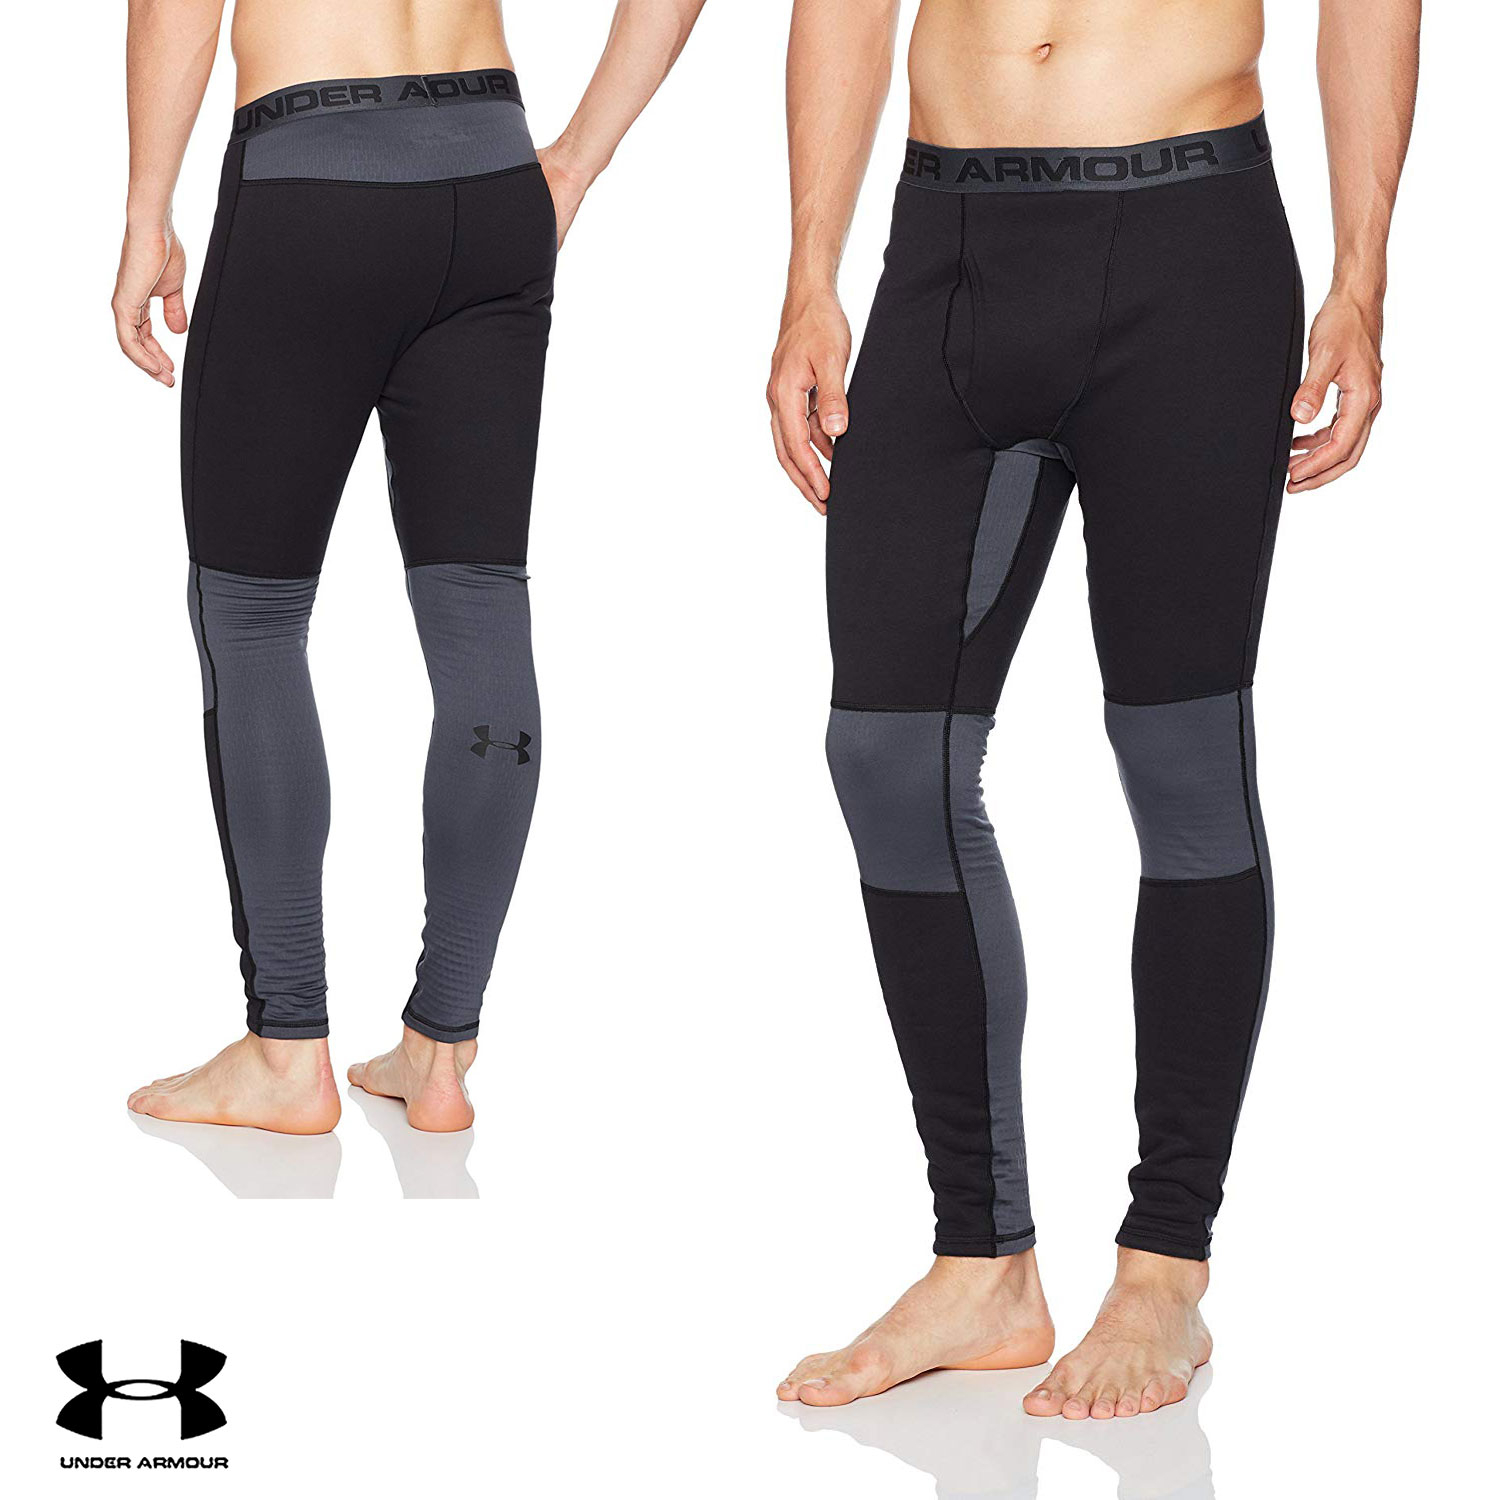 under armour stealth extreme pants